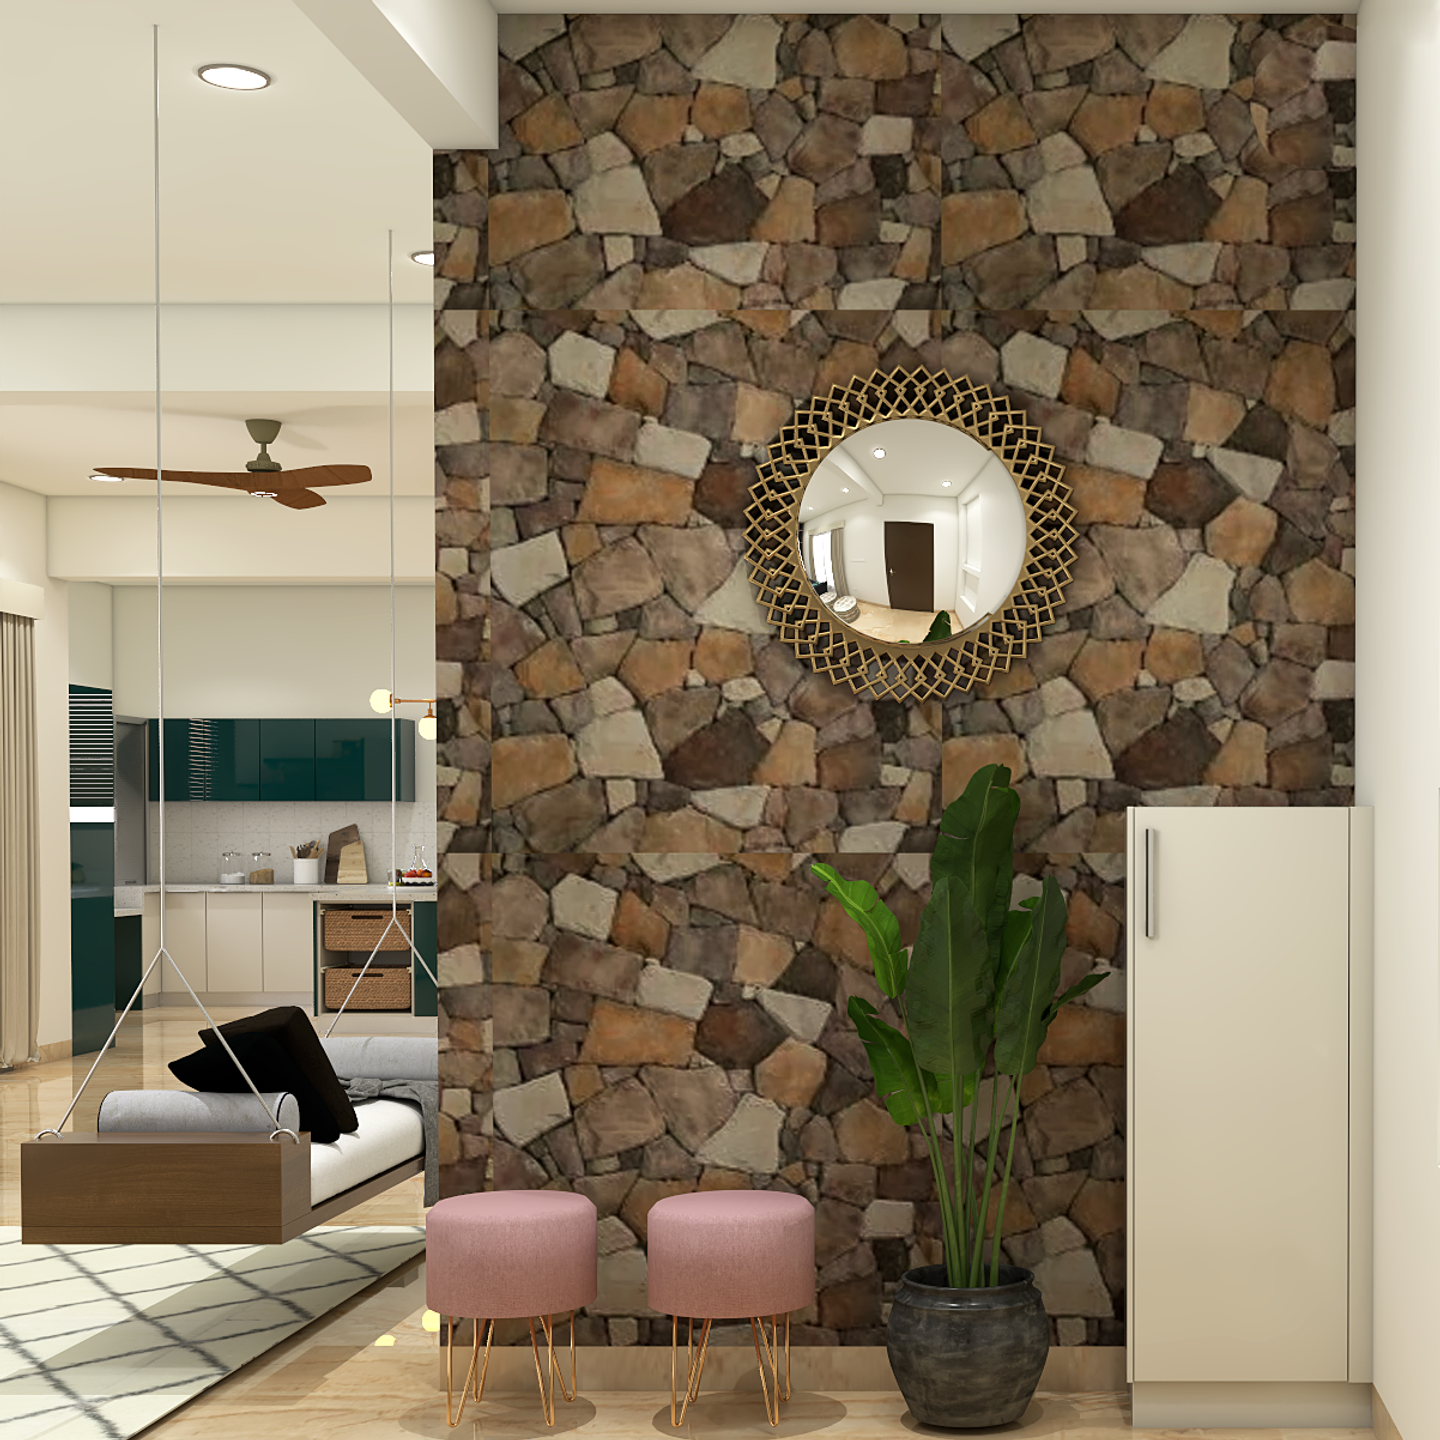 Contemporary Foyer With Stone Wall - Livspace